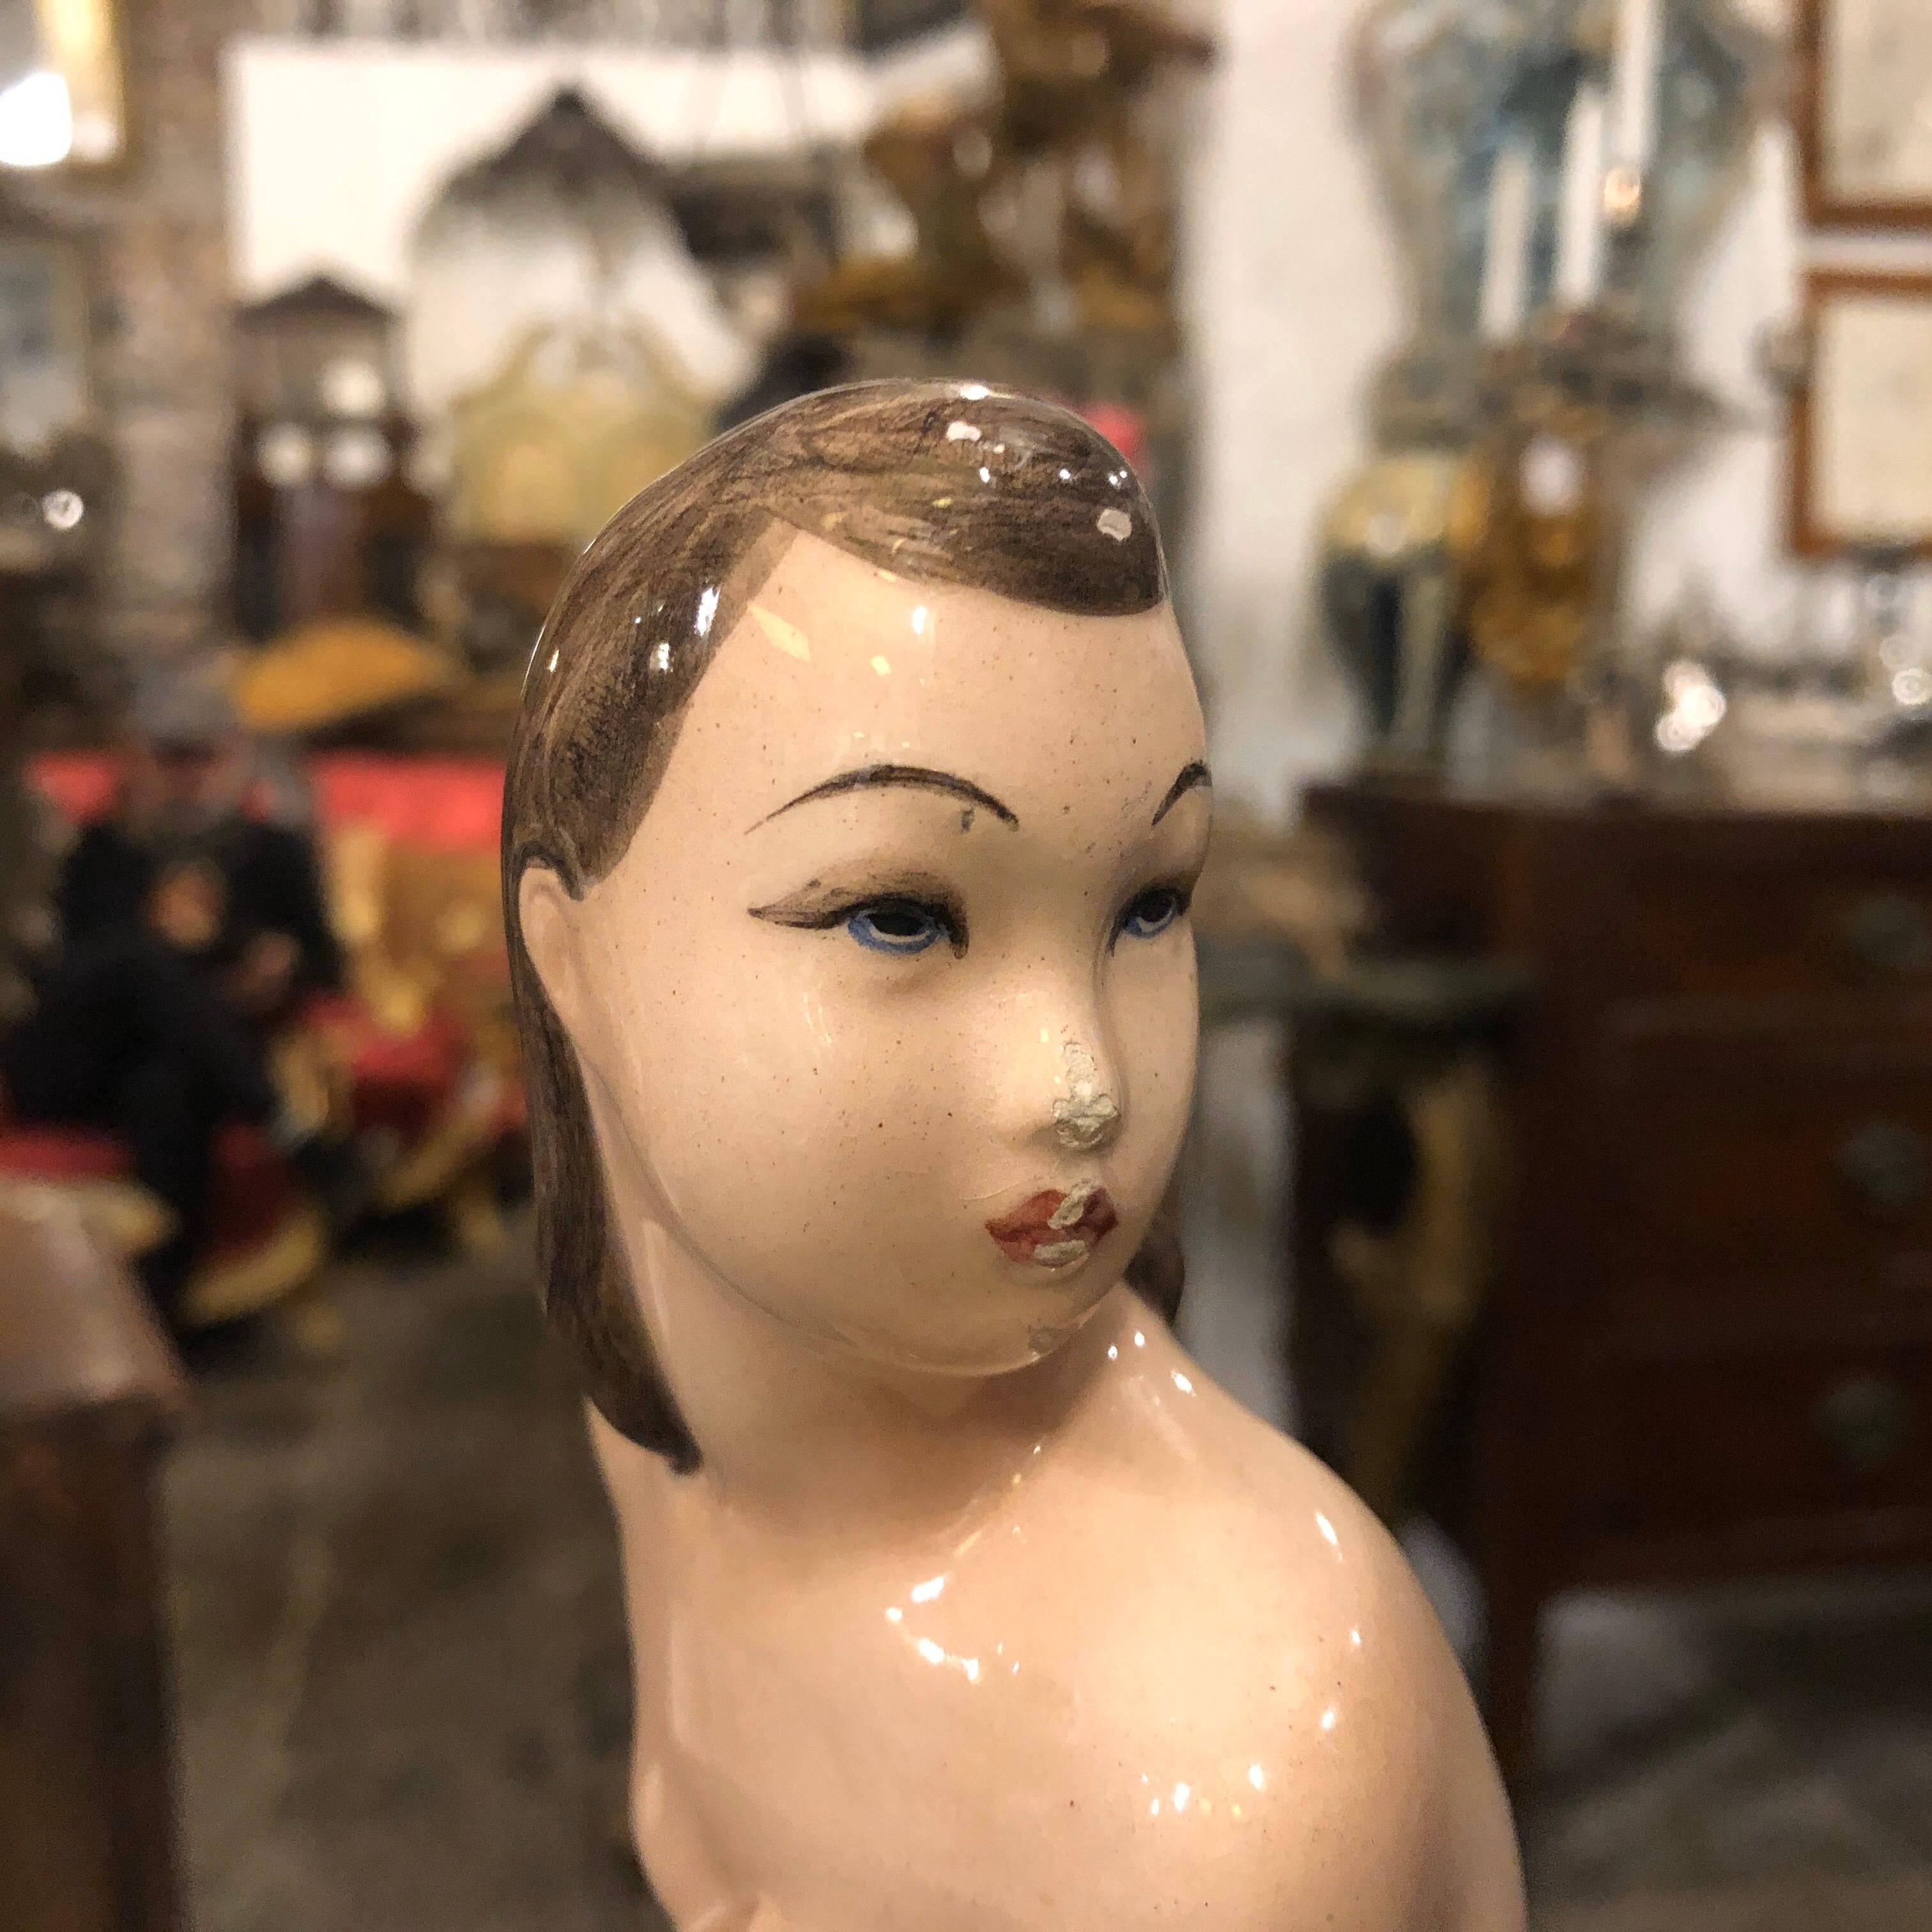 A stylish porcelain statue made in Italy in the 1940s by Cia Manna small laboratory in Turin. It's in good conditions with normal signs of age. A super piece of Italian Art Deco.